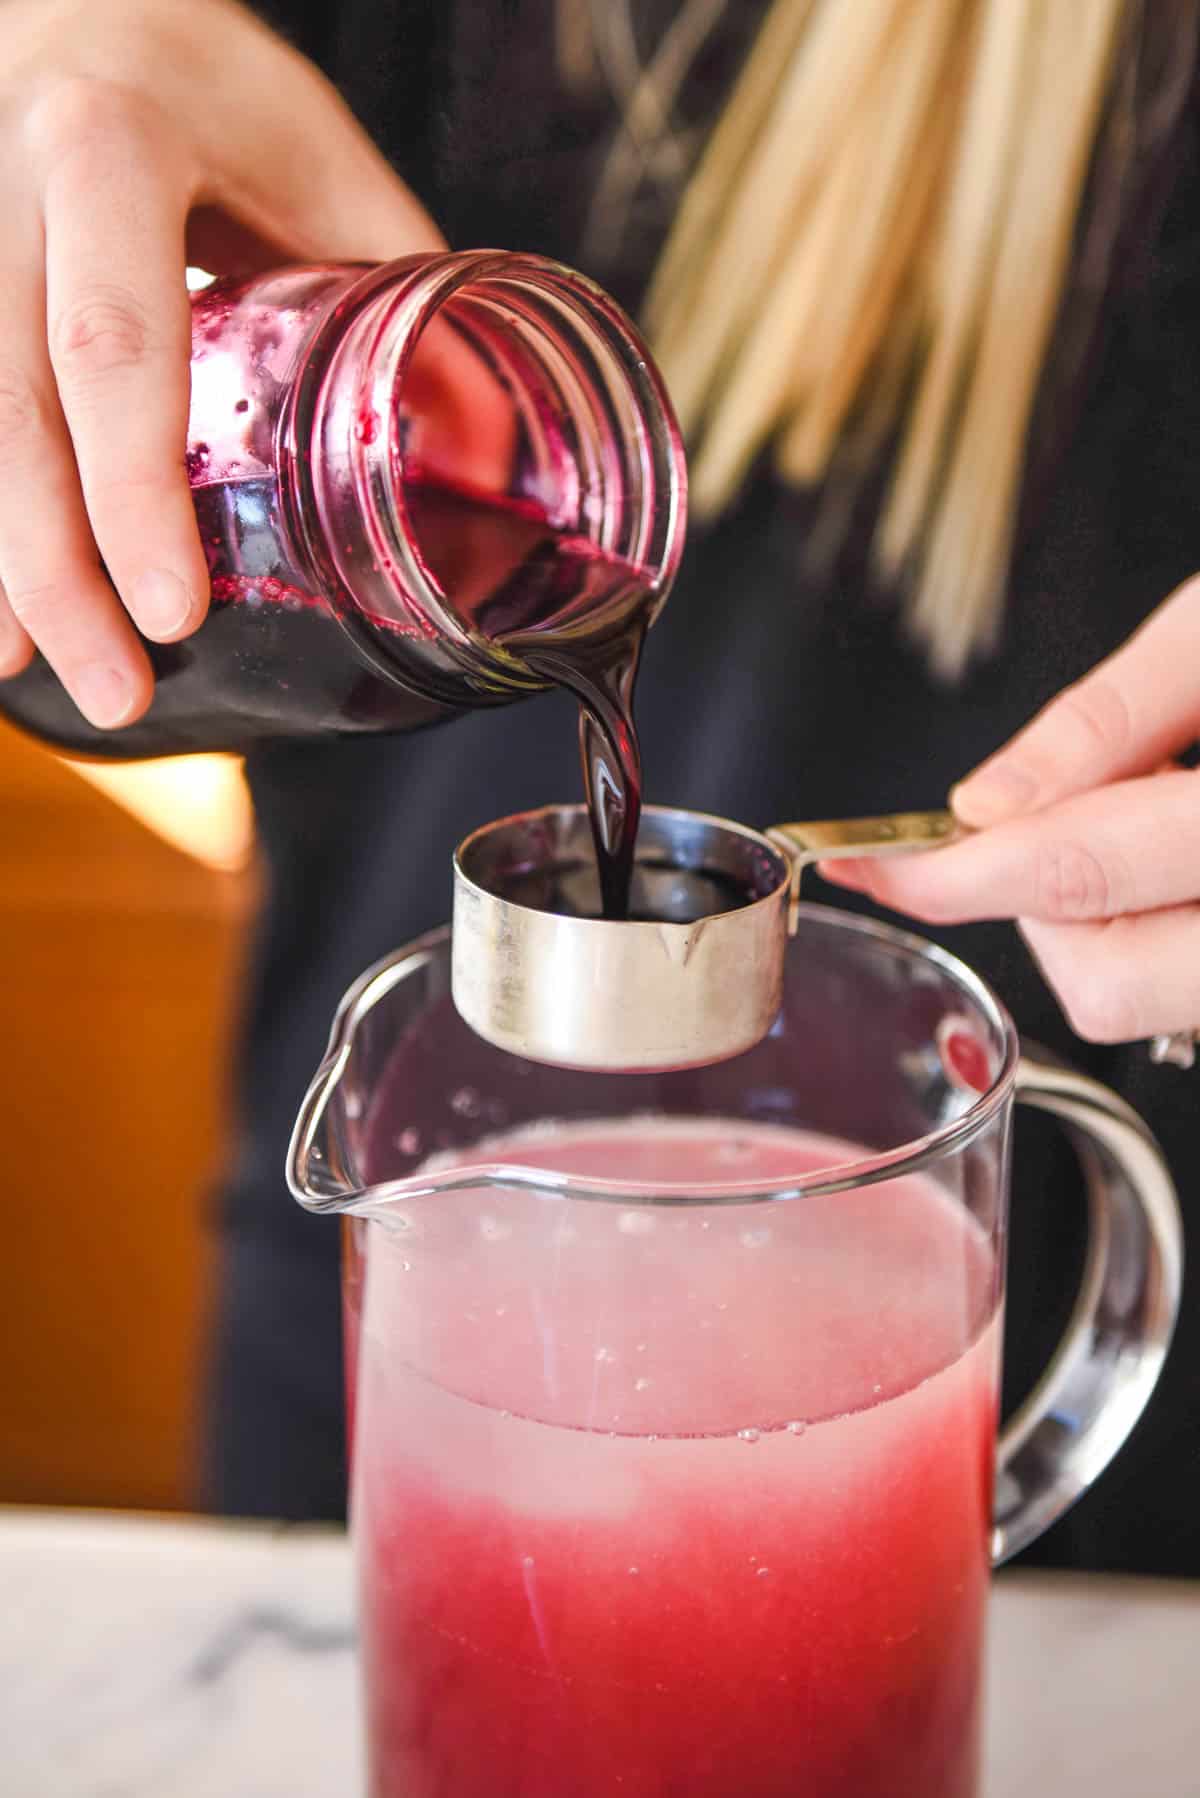 Woman measuring blueberry simple syrup to add to a pitcher.